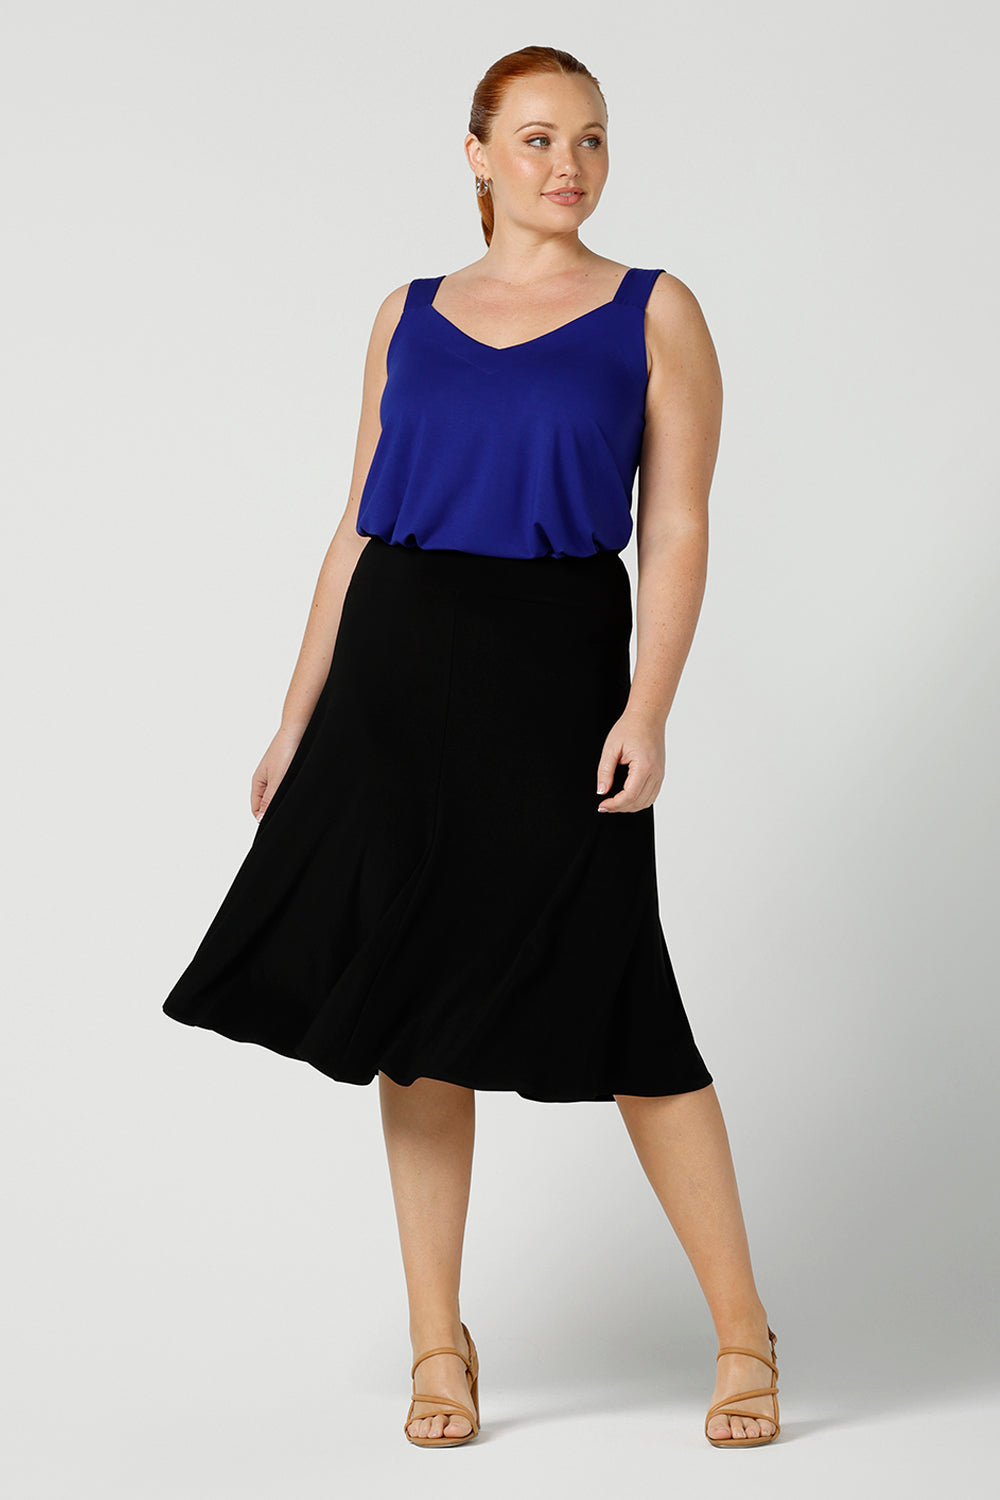 A black skirt by Australian made clothing brand Leina & Fleur, this knee length, A-line skirt falls softly in black jersey. A comfortable skirt for petite to plus size workwear, this skirt is shown on a size 12, curvy woman and worn with a cobalt blue cami in bamboo jersey. A good black skirt for your capsule wardrobe, shop skirts at Leina & Fleur's online clothing boutique Australia.